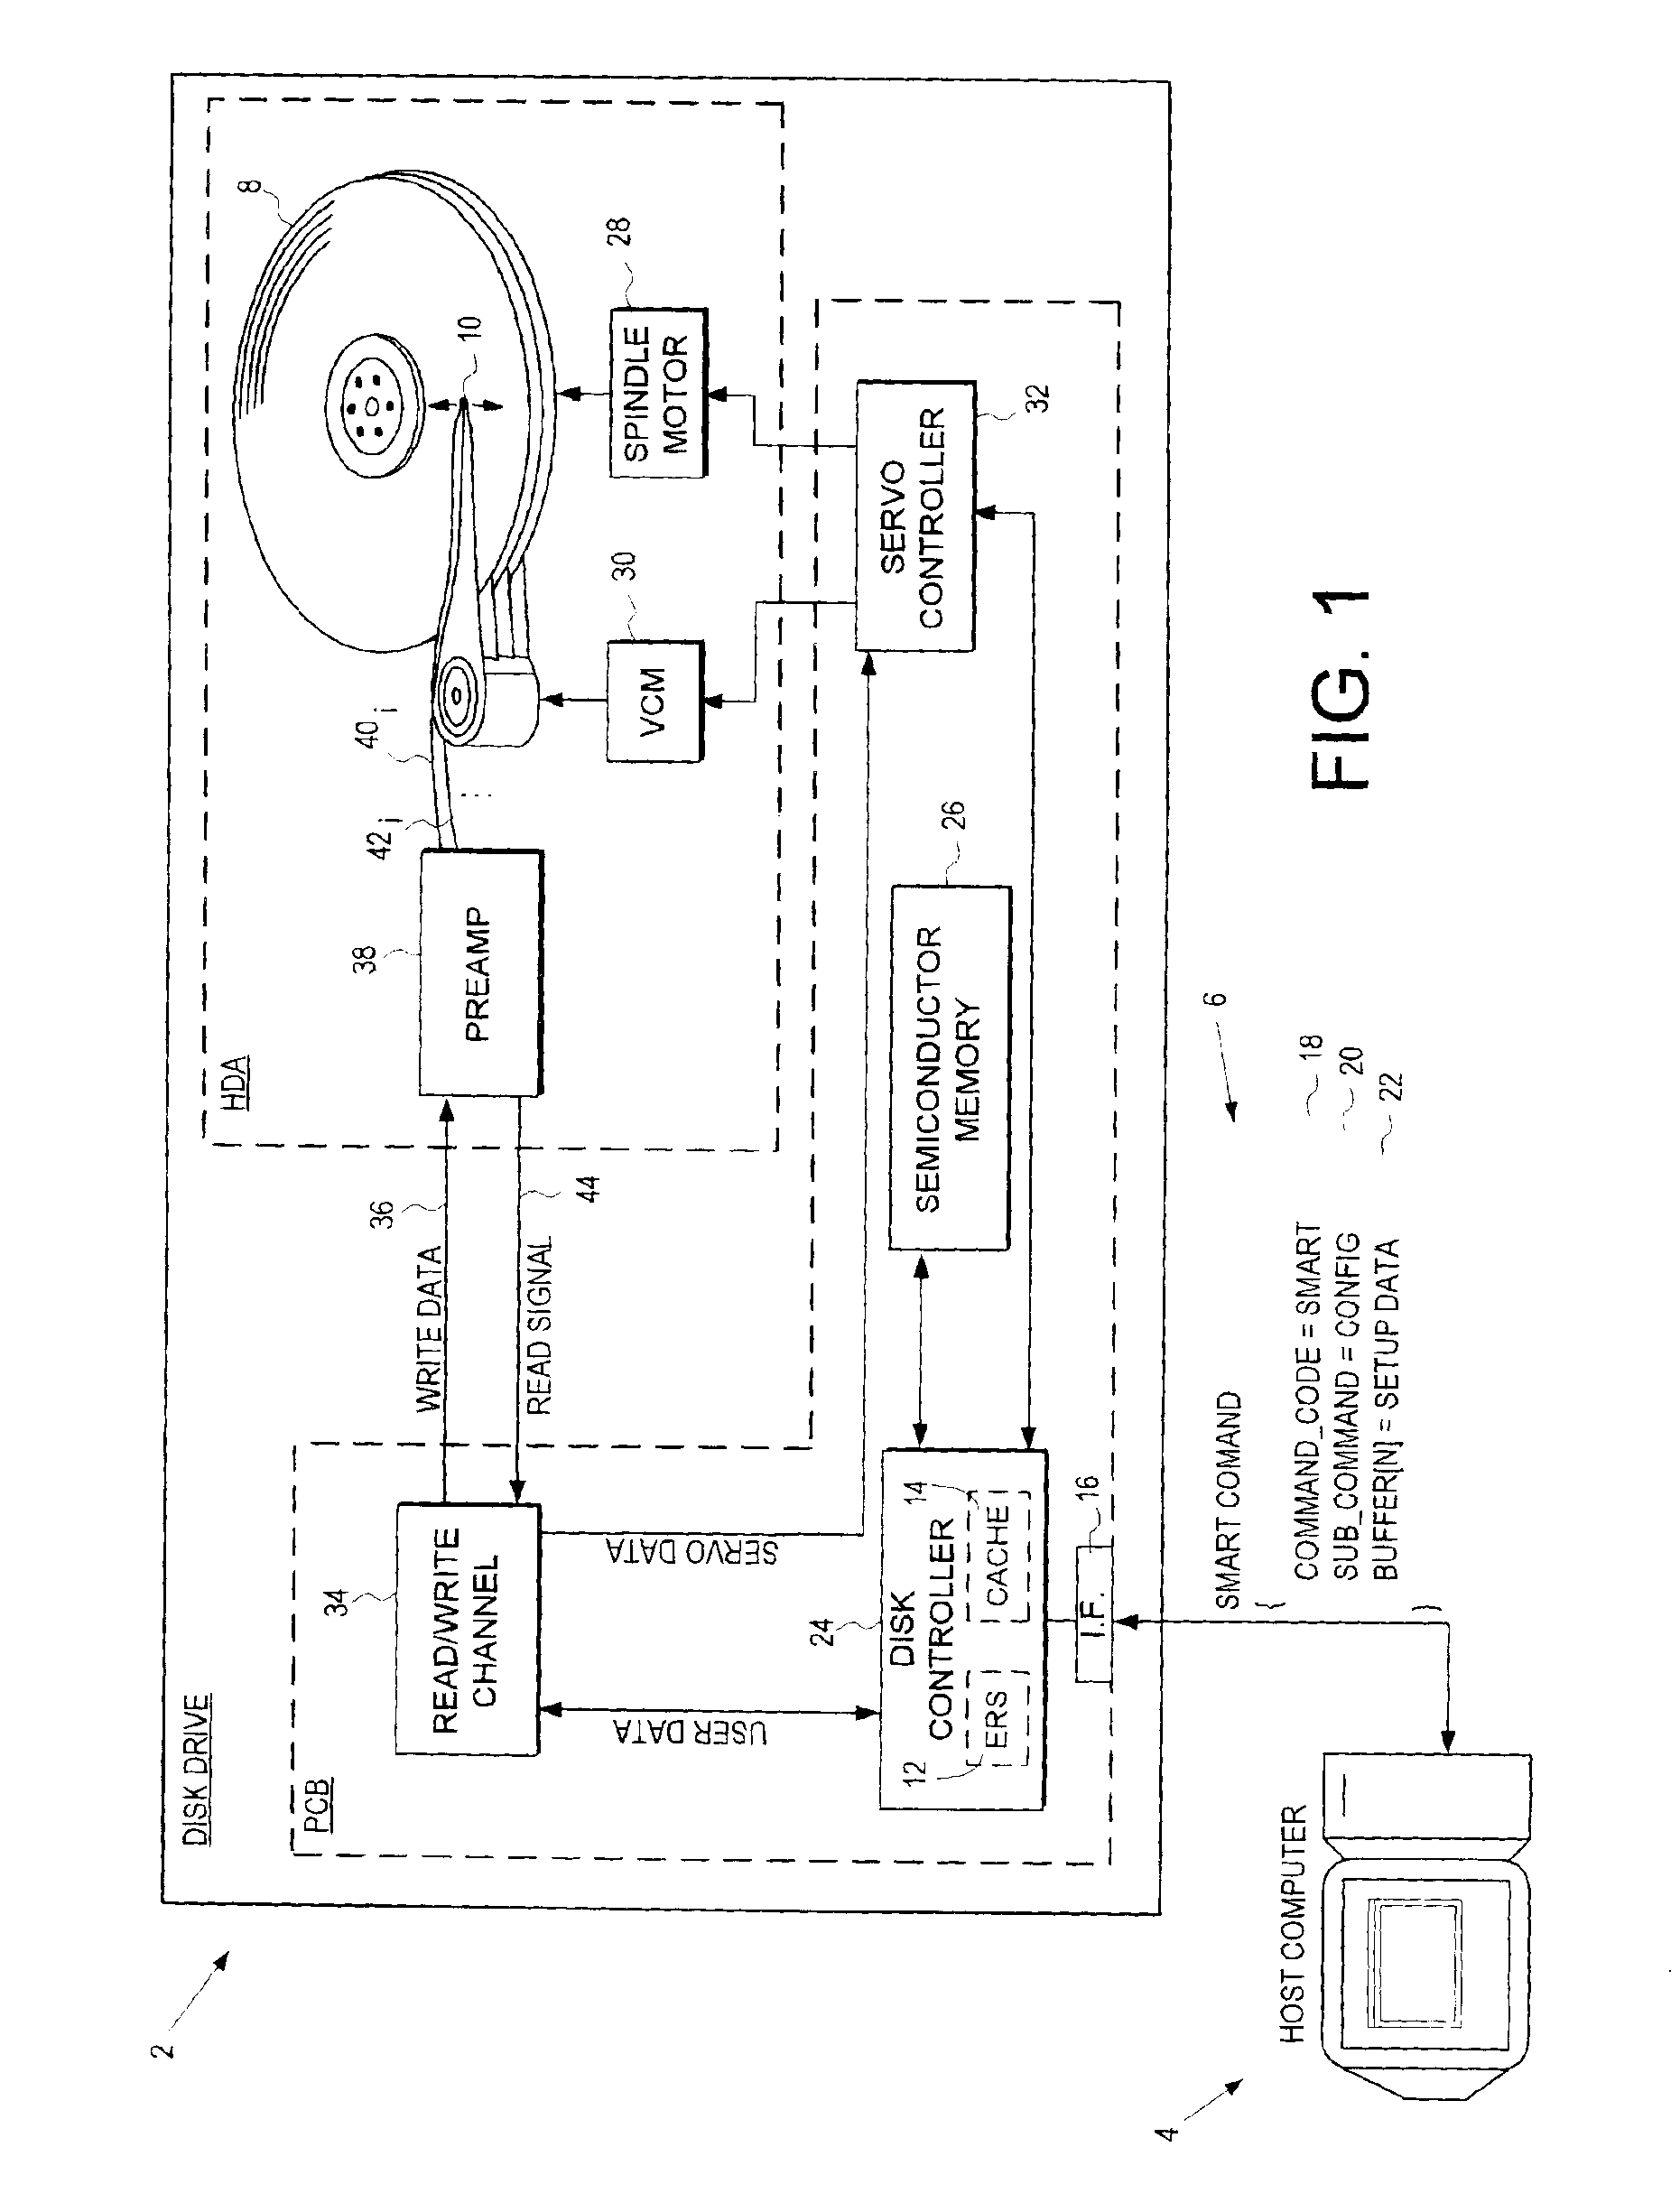 Disk drive for receiving setup data in a self monitoring analysis and reporting technology (SMART) command